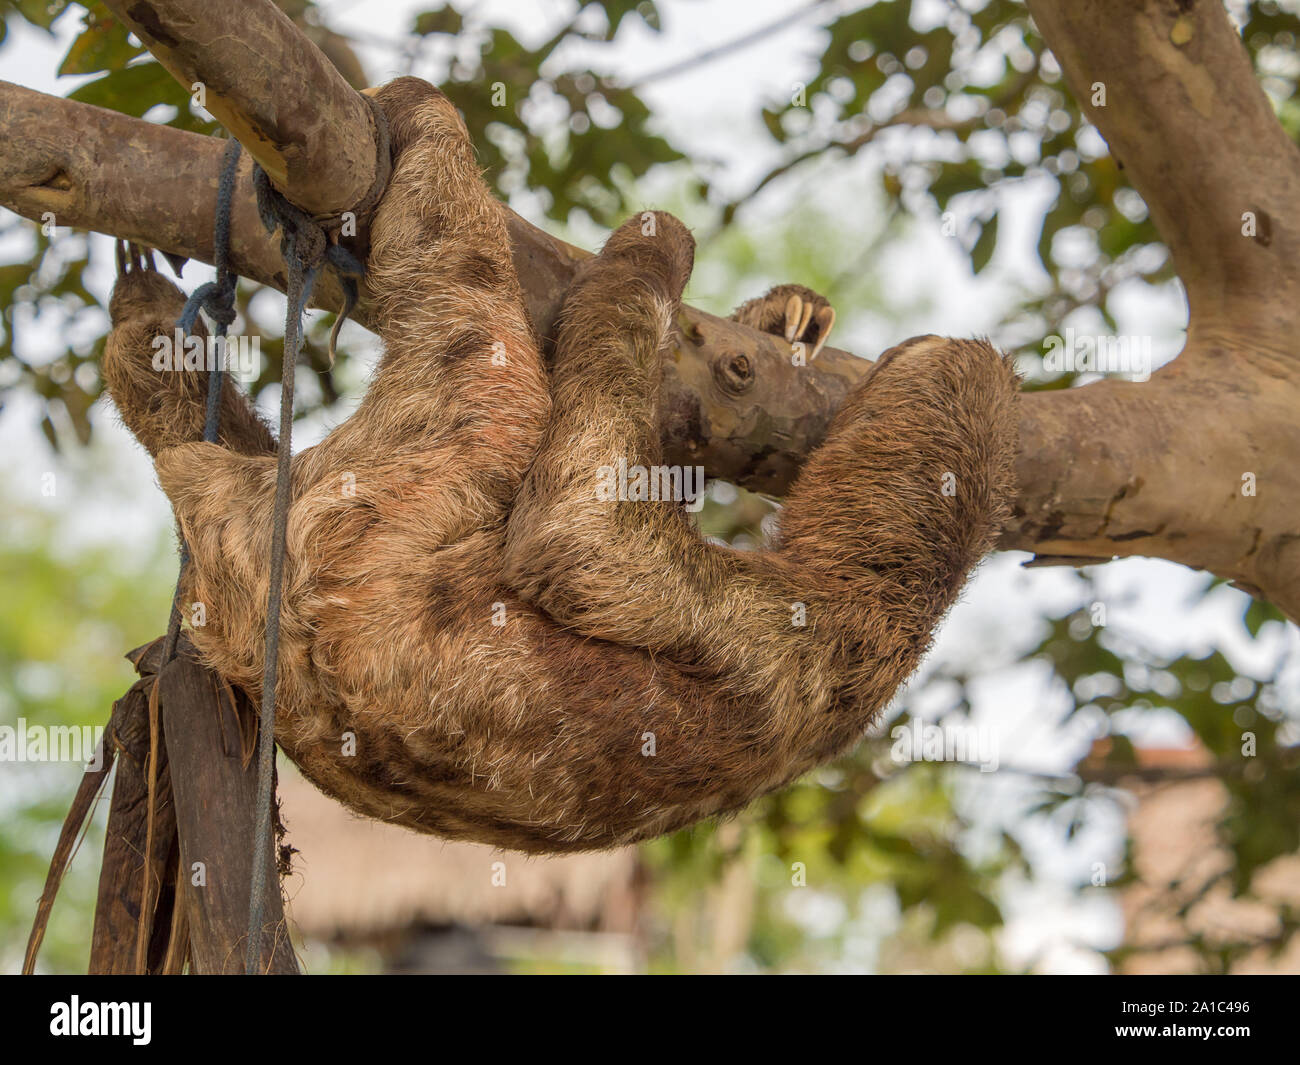 The sloth walks slowly over the tree in Amazon jungle, Brazil, Latin America. Amazonia. Sloths are arboreal mammals noted for slowness of movement and Stock Photo